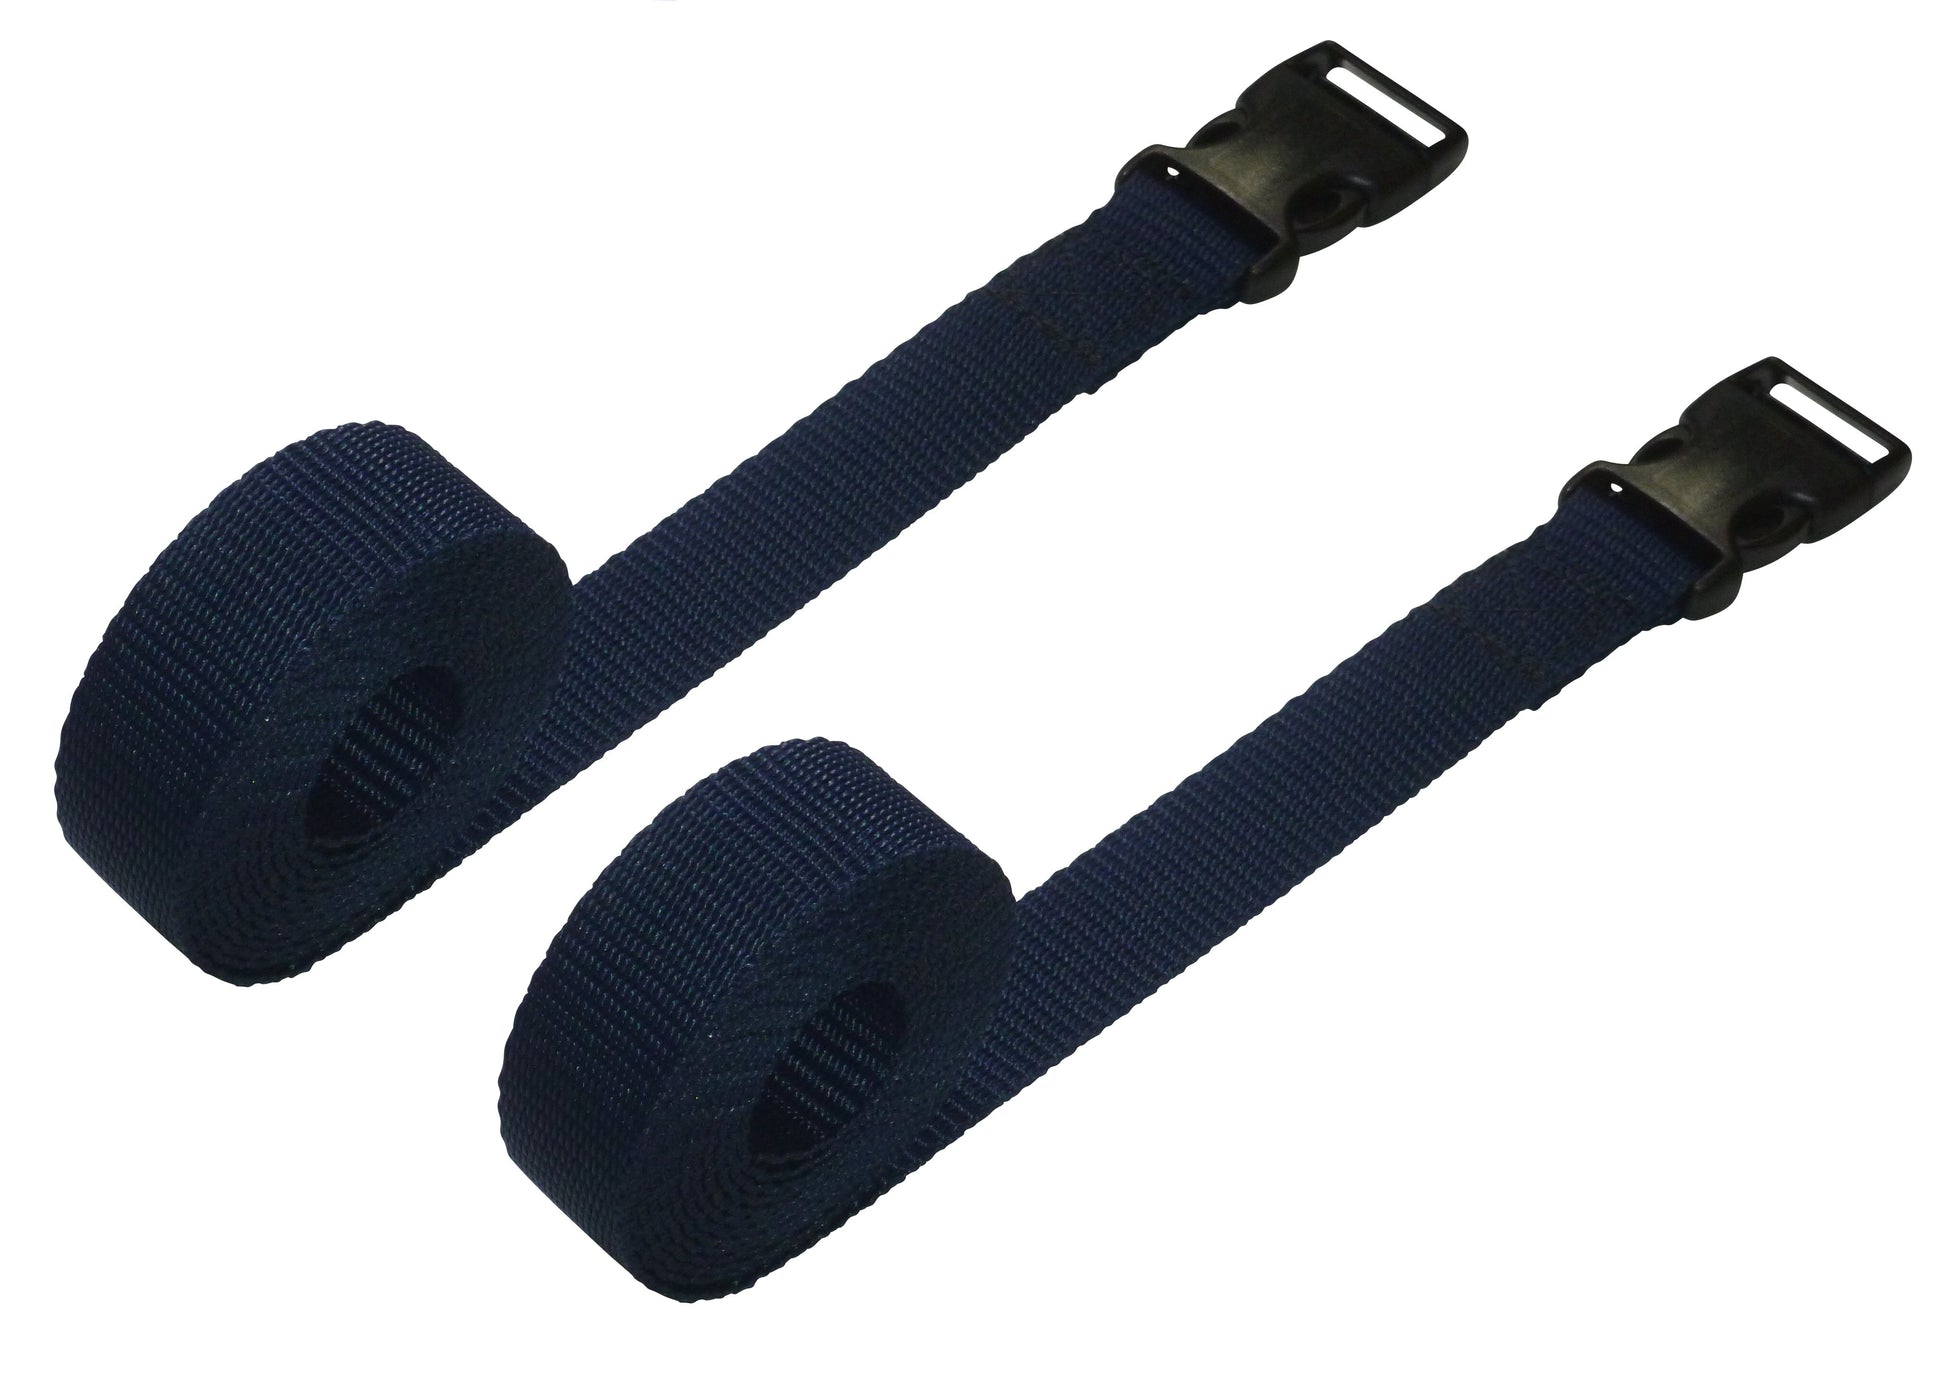 Benristraps 25mm Webbing Strap with Quick Release Buckle (Pair) in navy blue